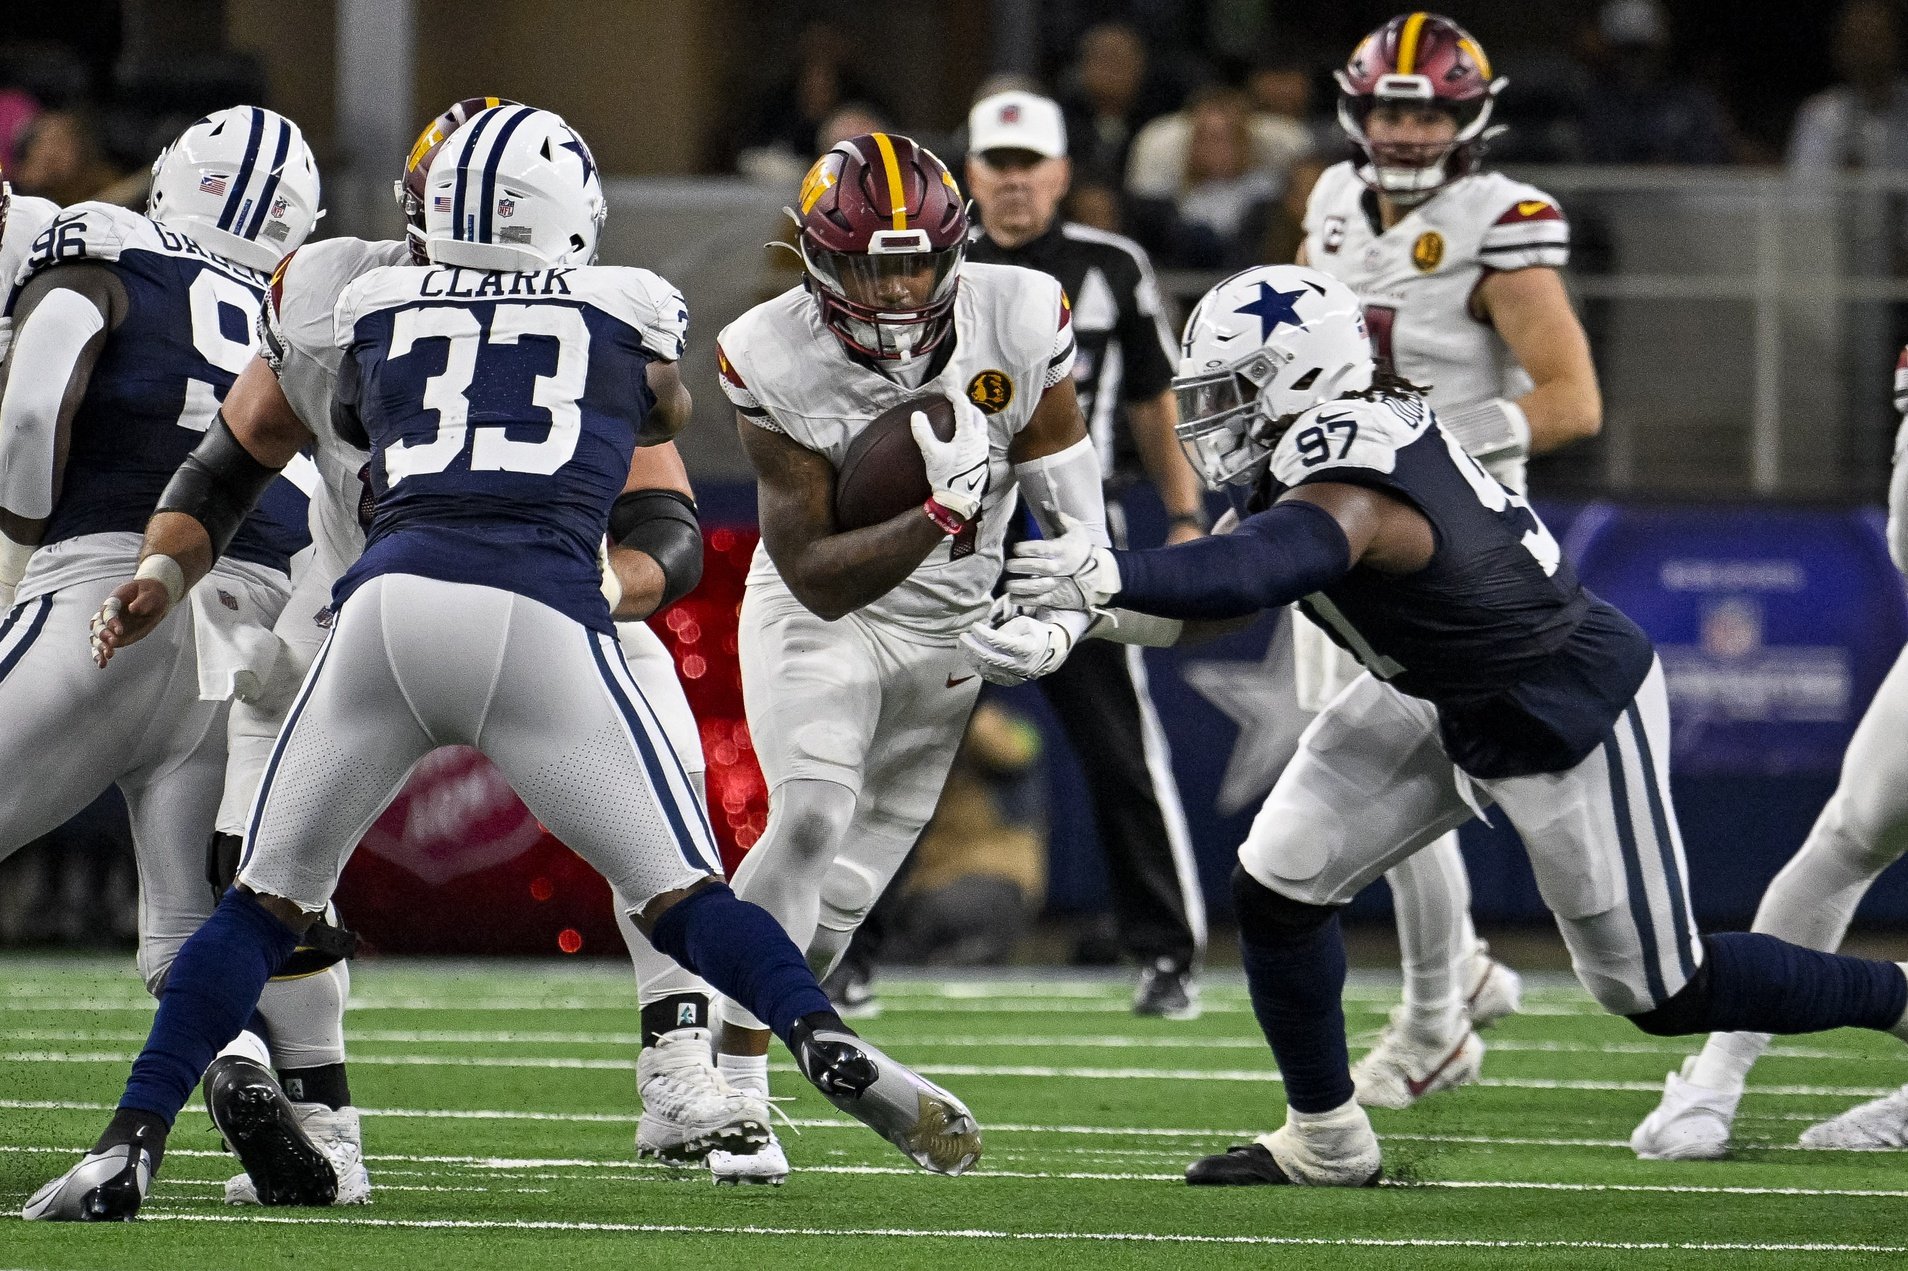 Washington Commanders running back Brian Robinson Jr. (8) in action during the game between the Dallas Cowboys and the Washington Commanders at AT&T Stadium.